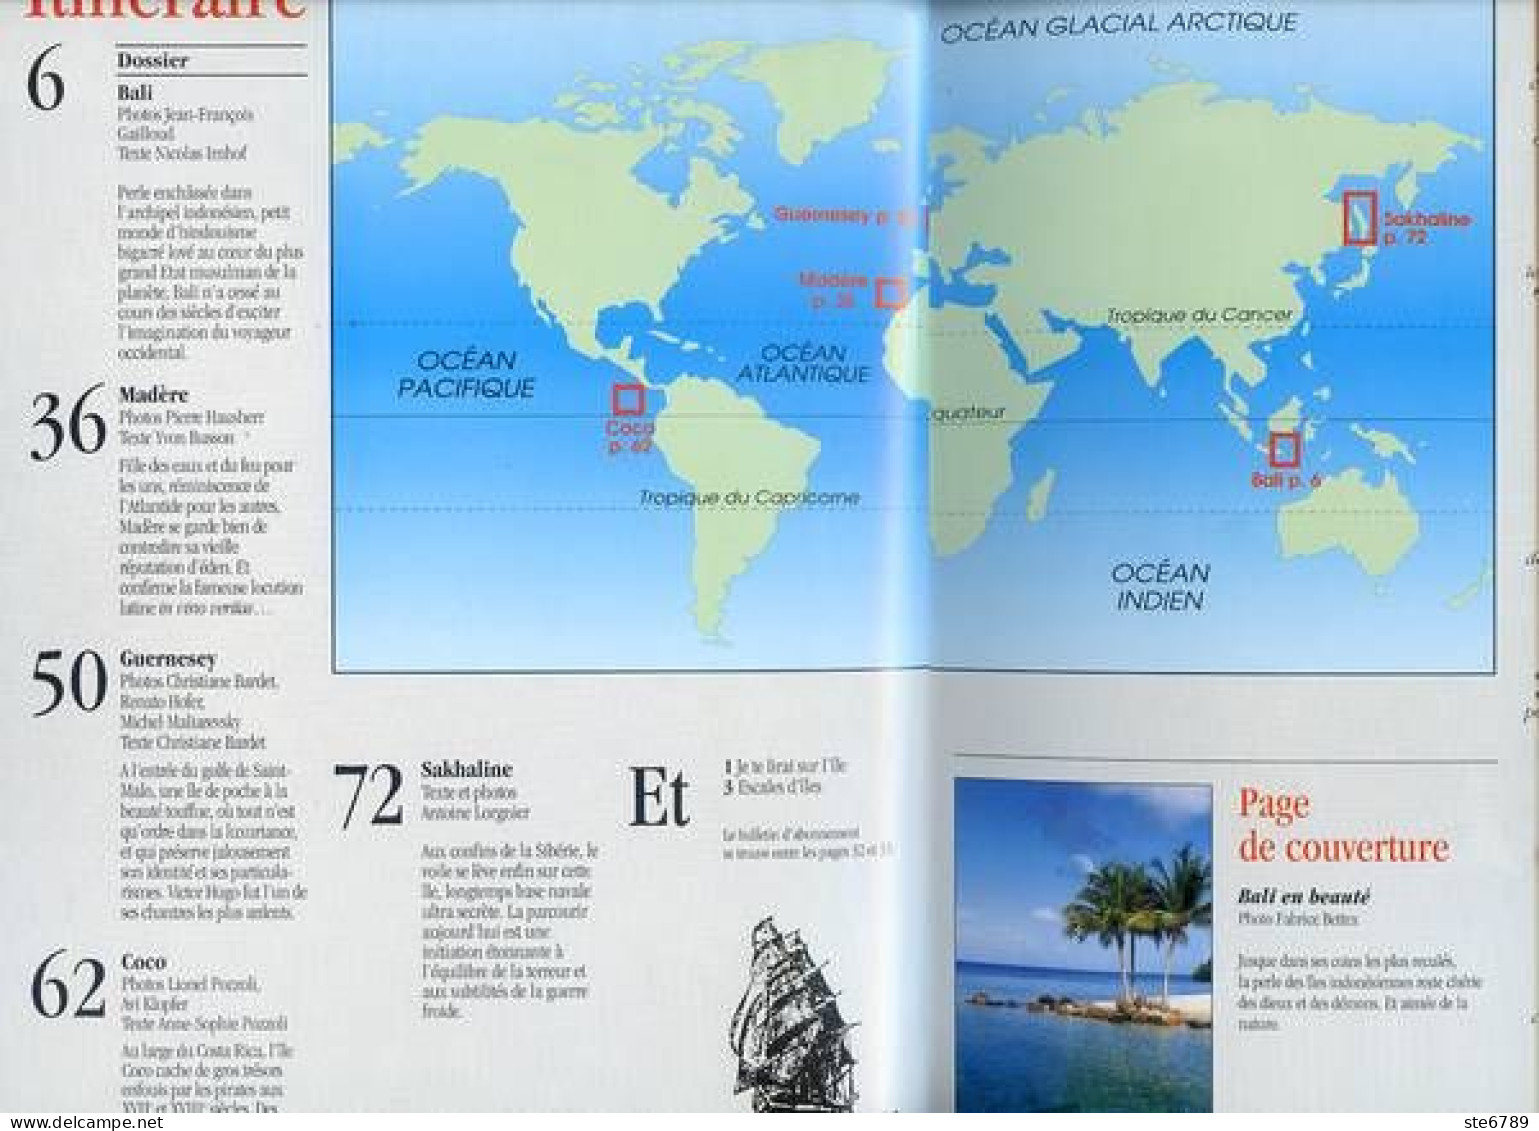 ILES MAGAZINE N° 35 Dossier Bali , Madère , Guernesey , Sakhaline , Ile Coco - Geographie